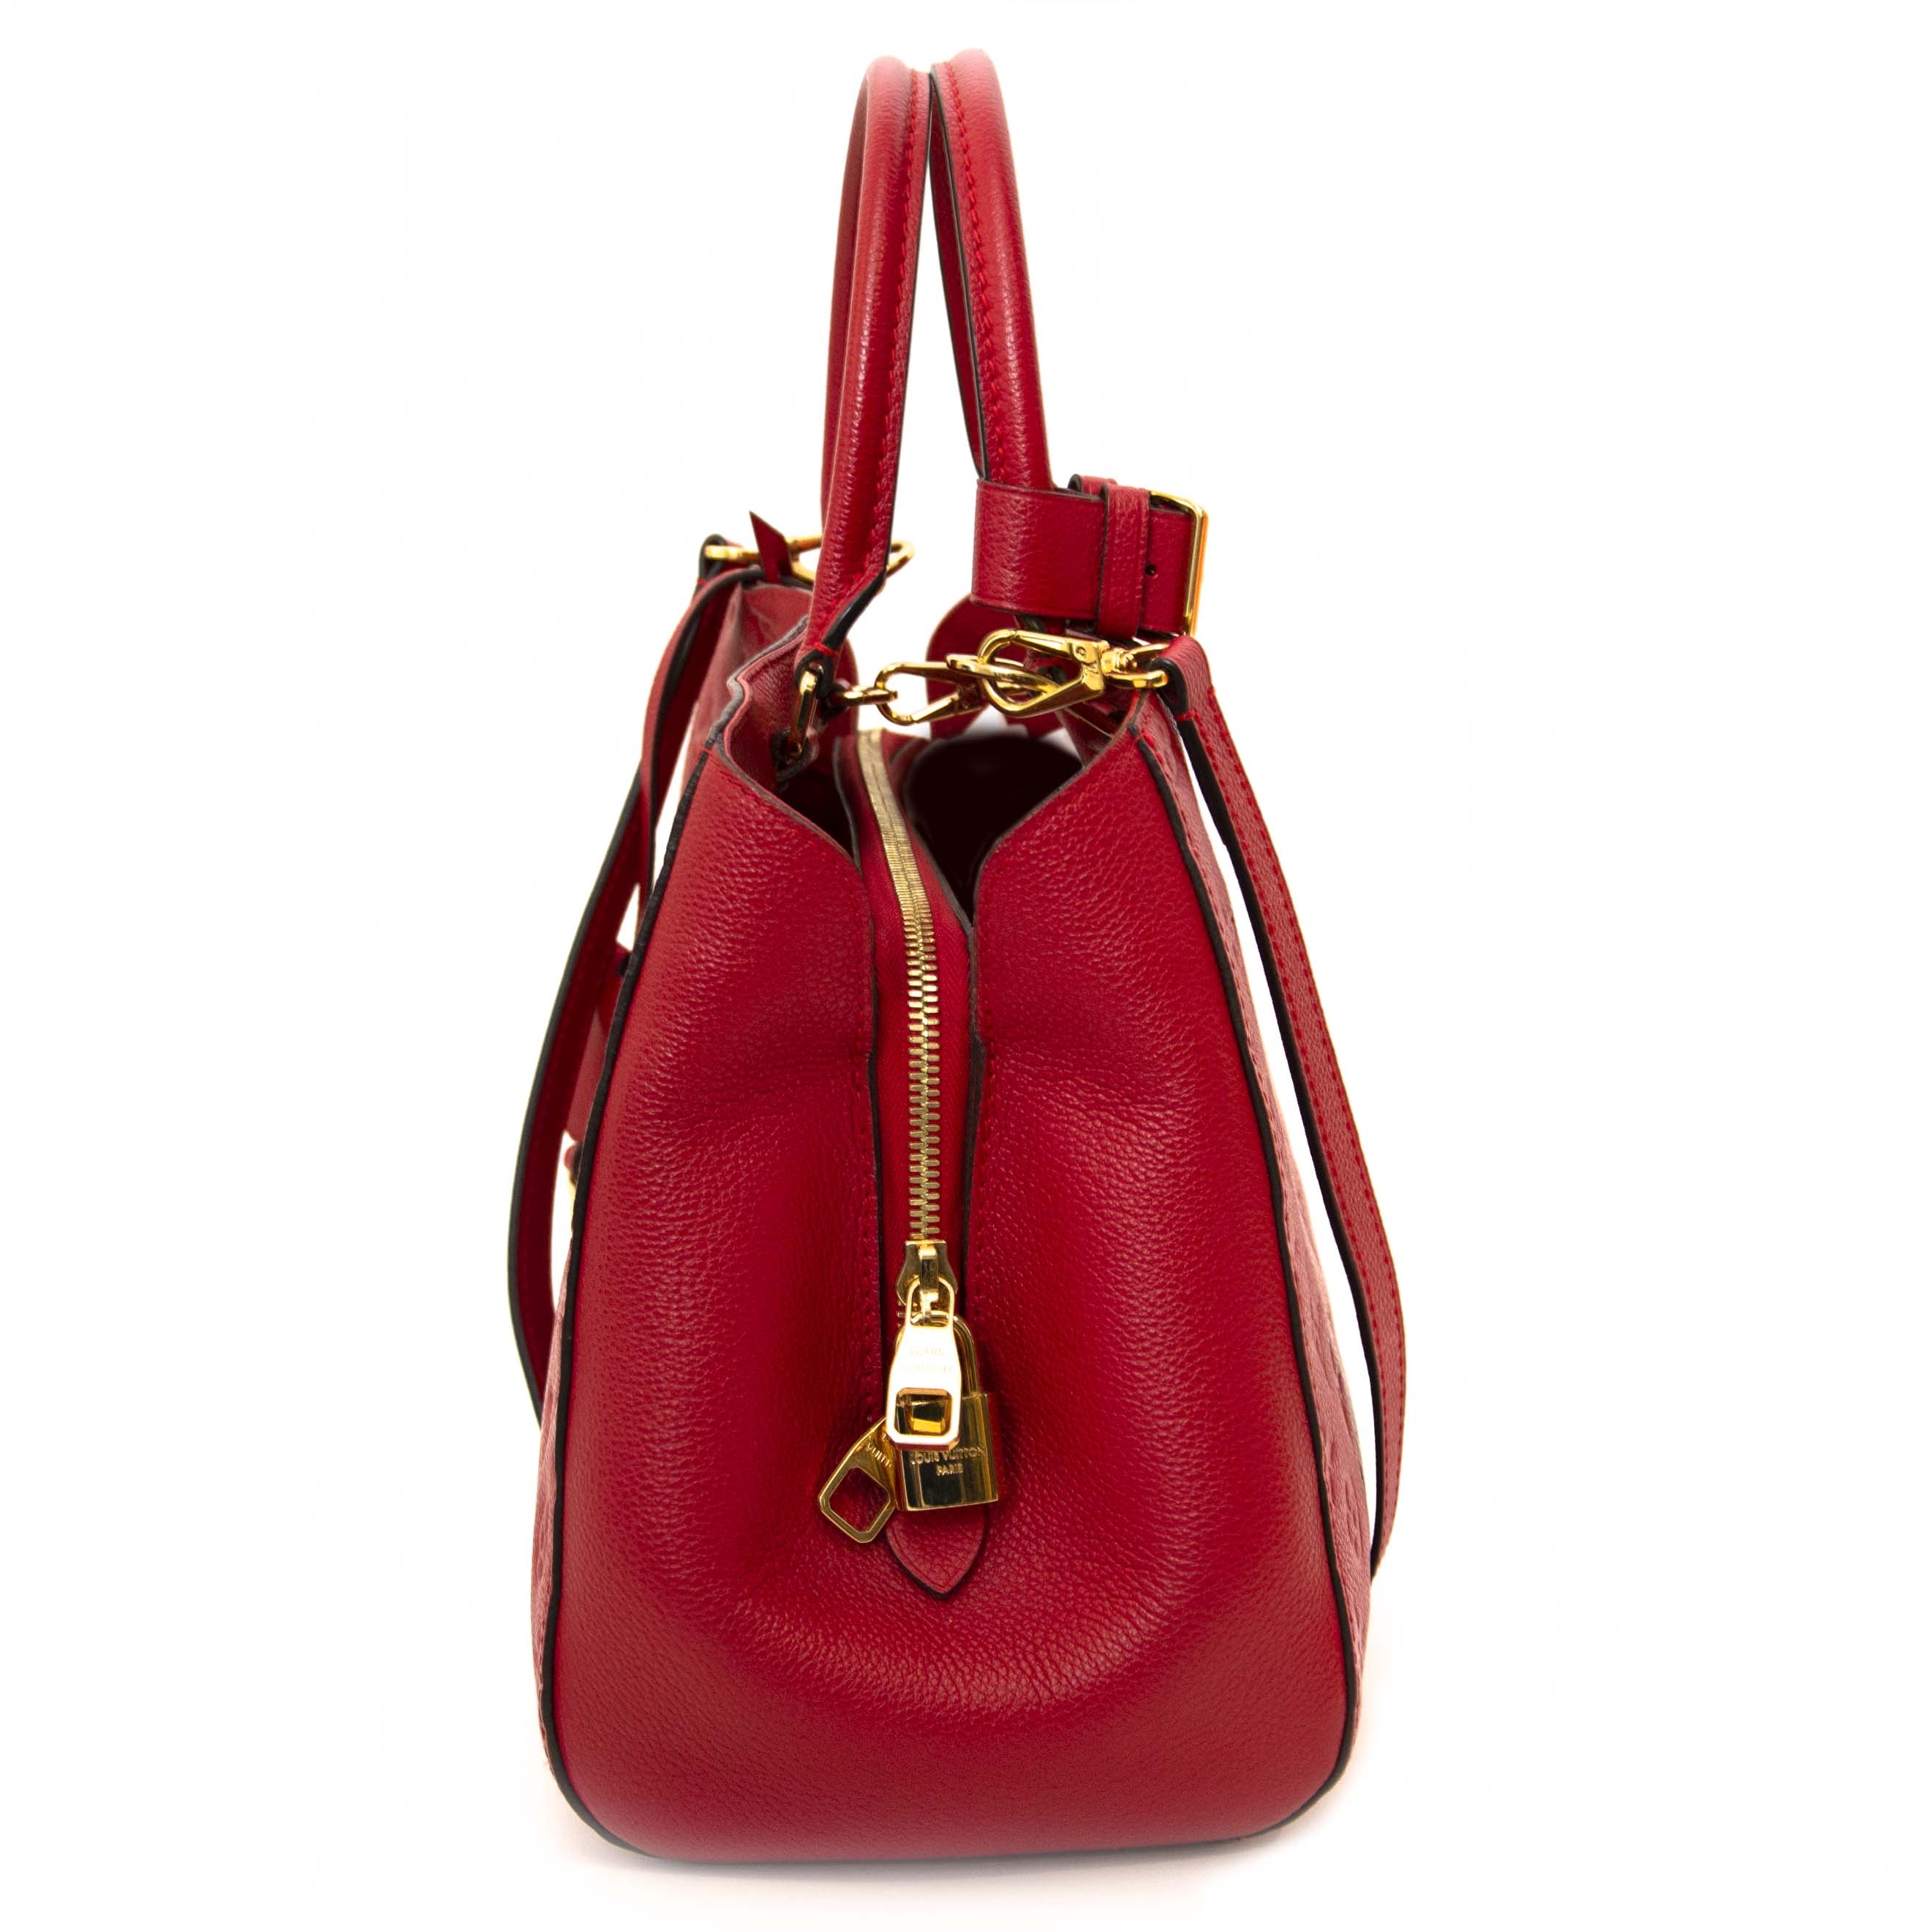 Montaigne leather handbag Louis Vuitton Red in Leather - 31407104